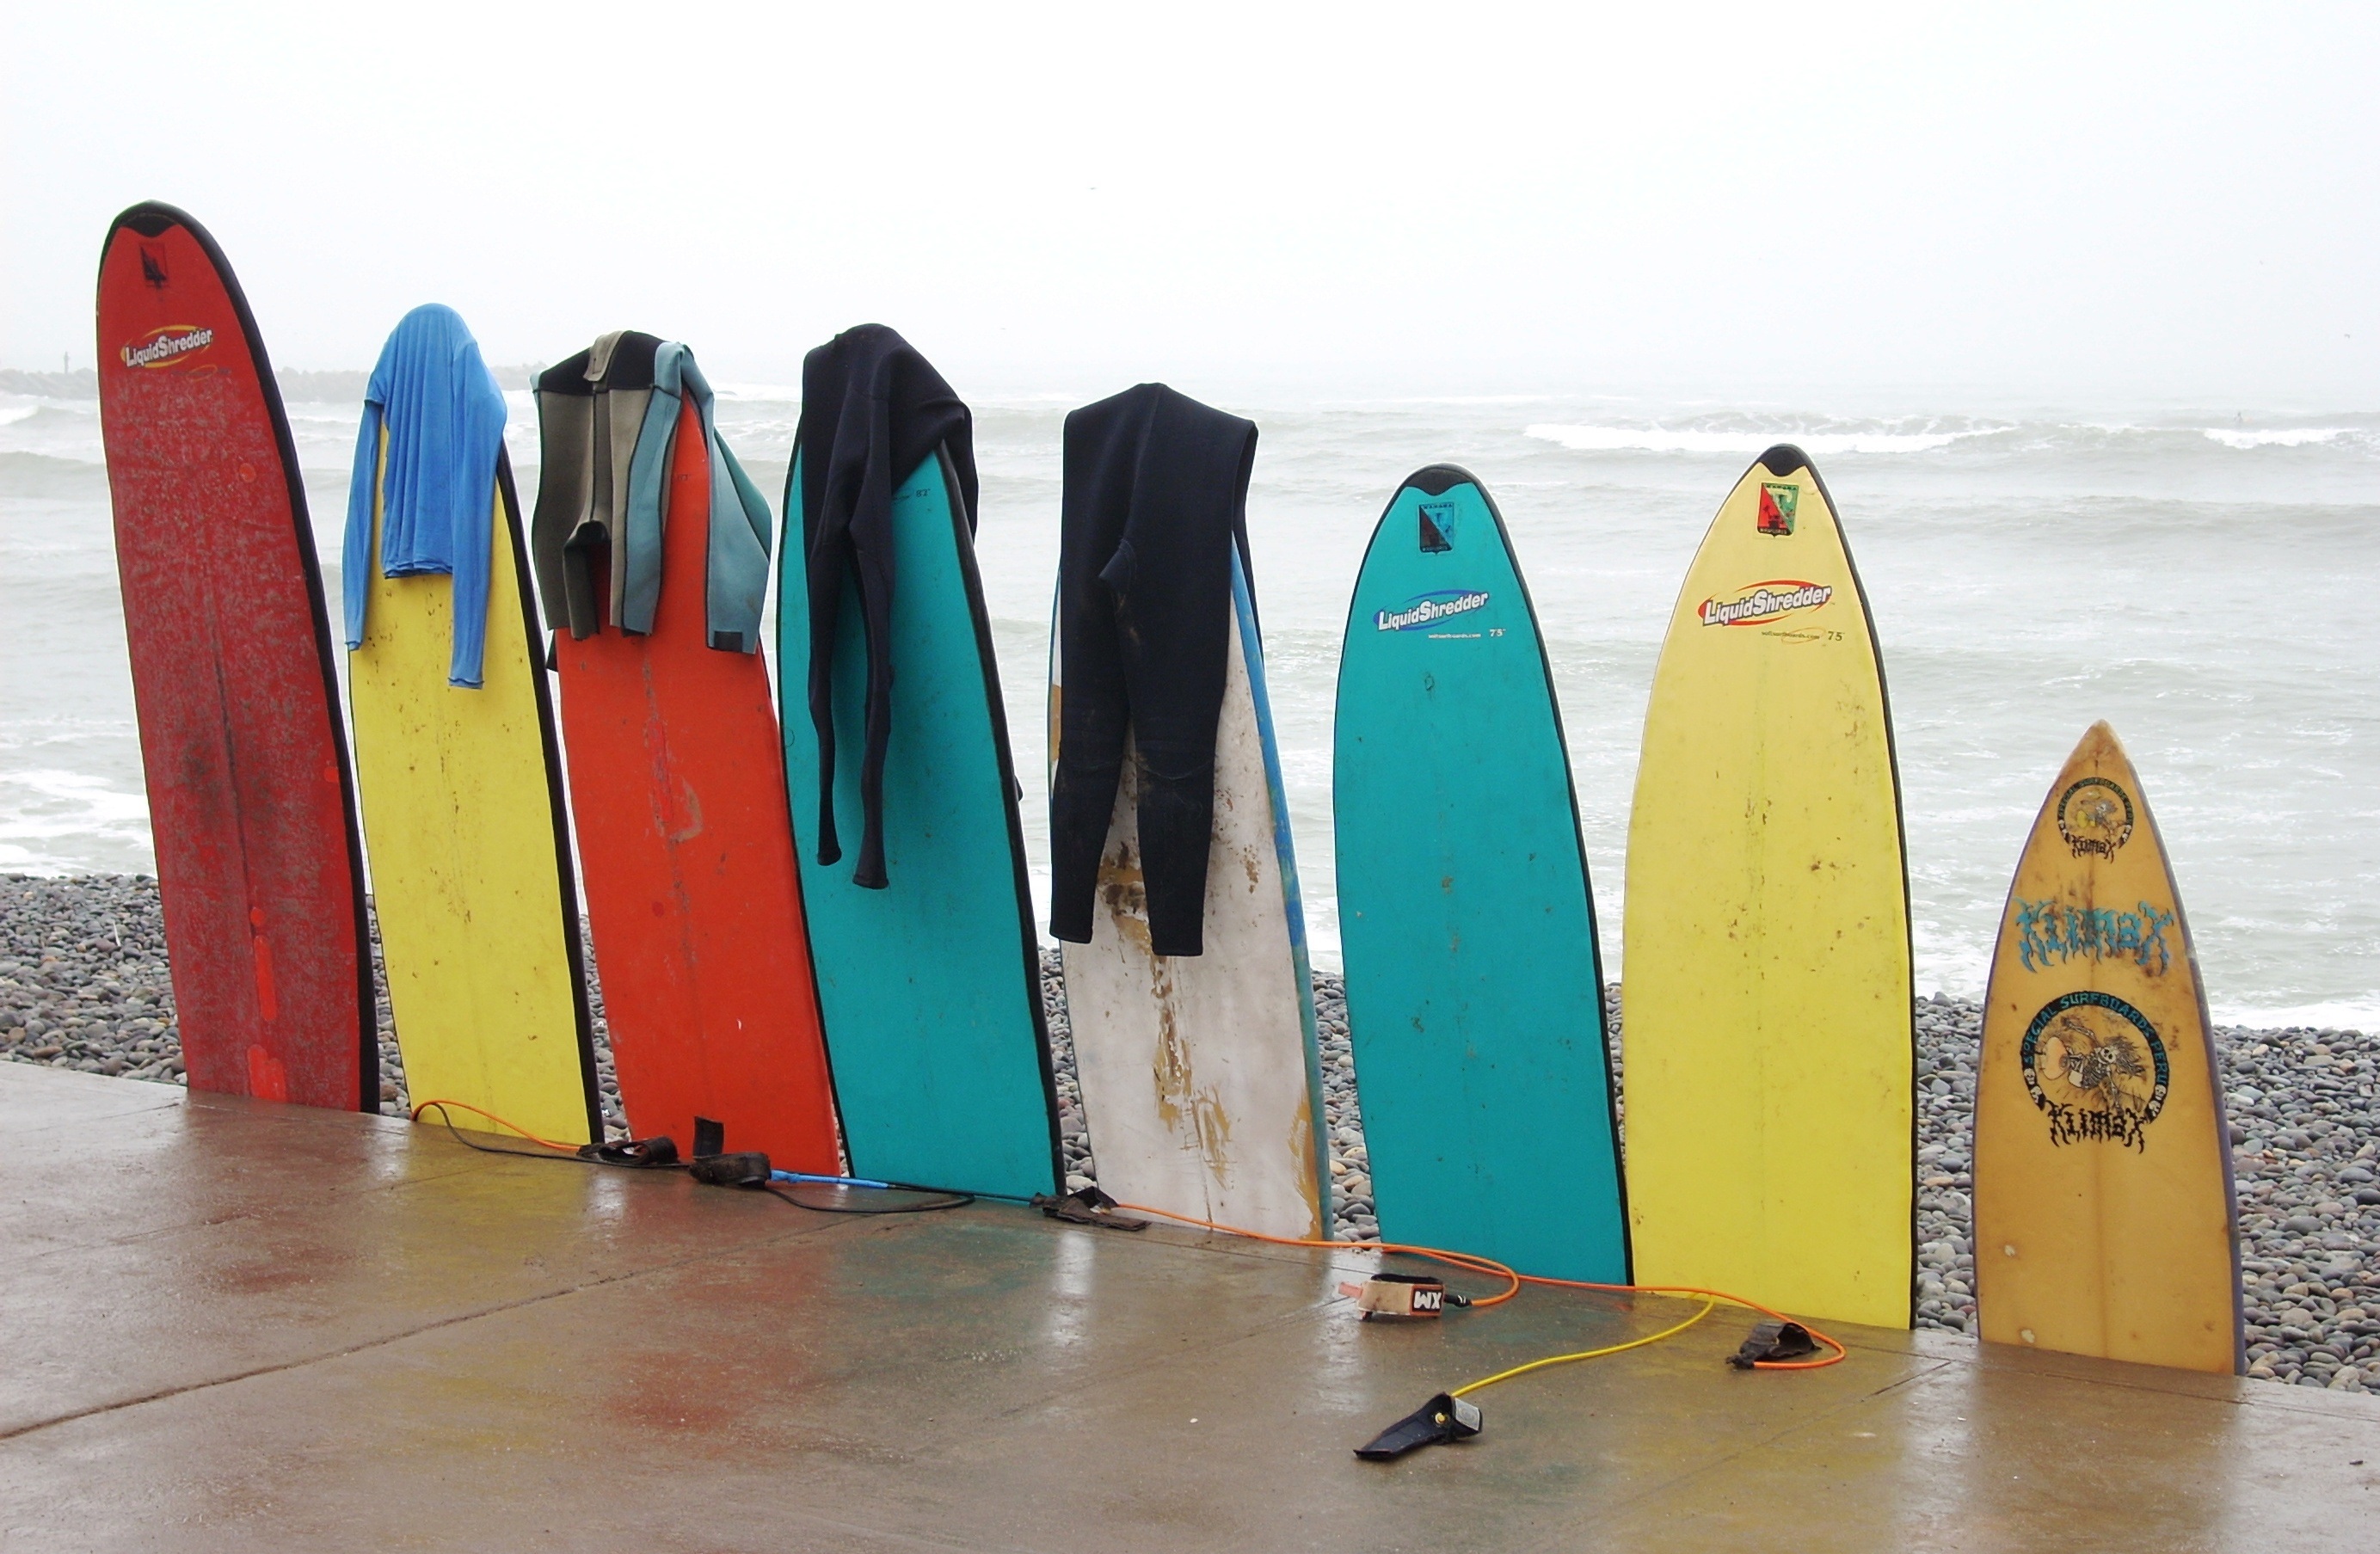 PC Wallpapers sports, surfing, colorful, surfboard